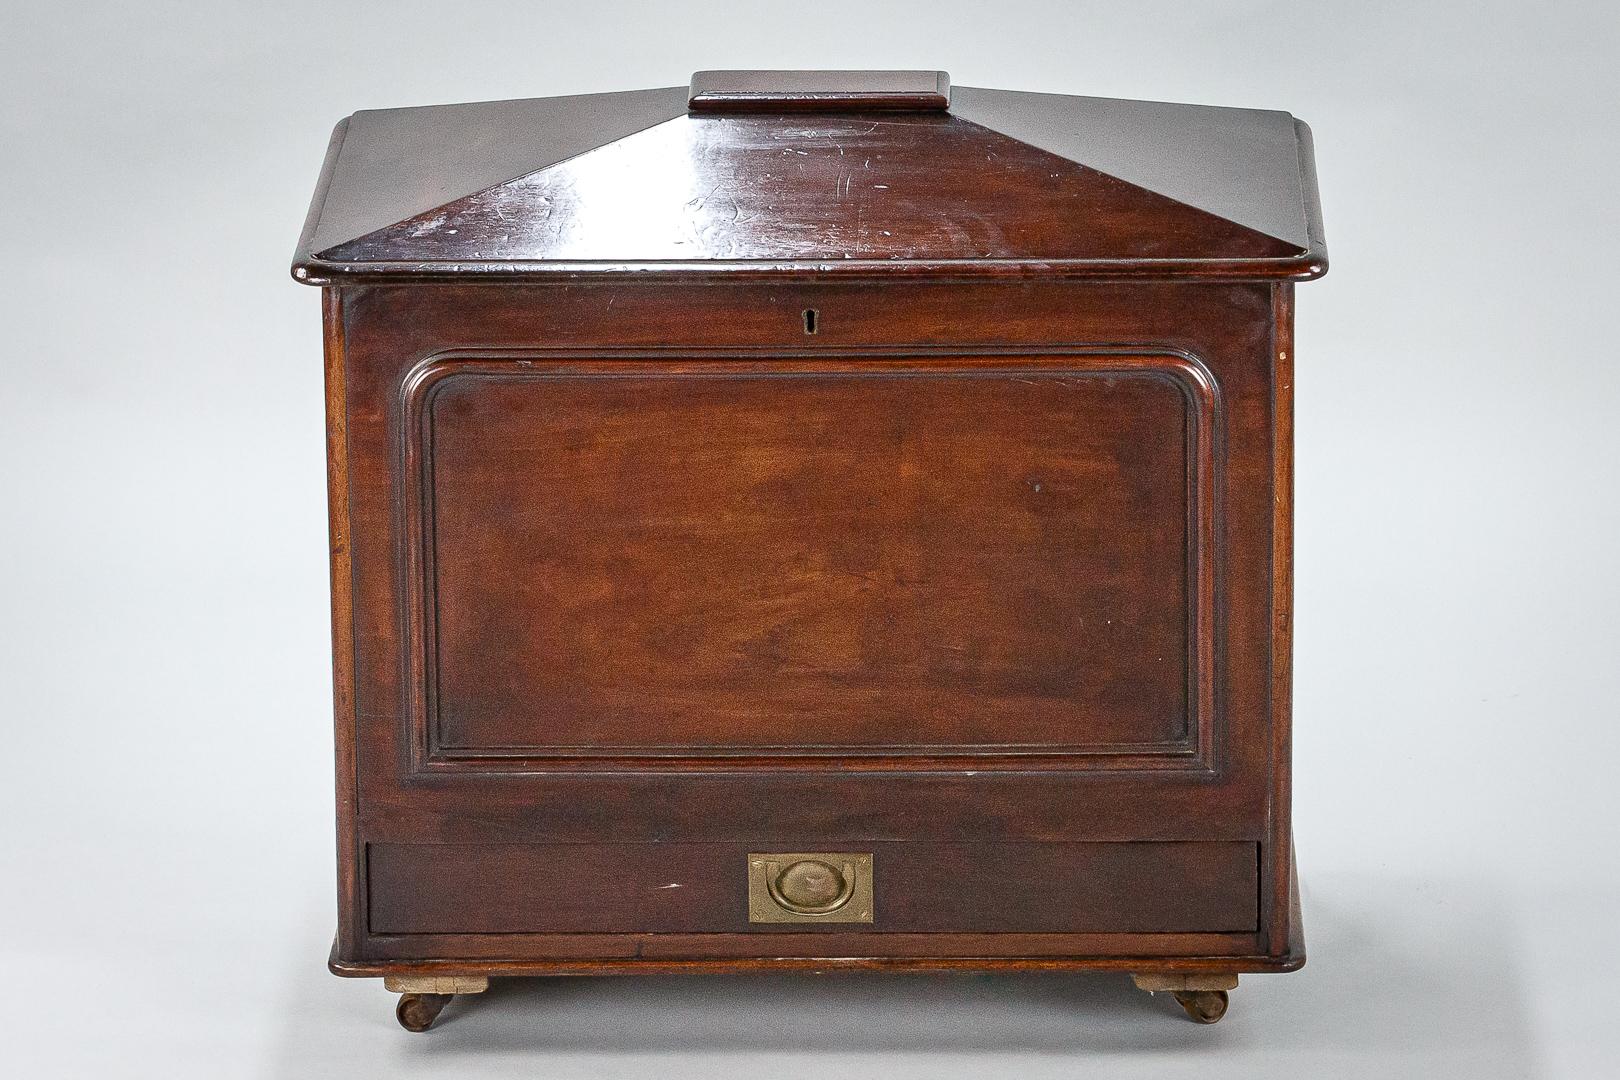 19th century wine cellarette or cooler, all original lead lining, plug and drawer lining. London makers mark. As expected condition. England, circa 1860
Dimensions: 76cm x 65cm x 43cm.